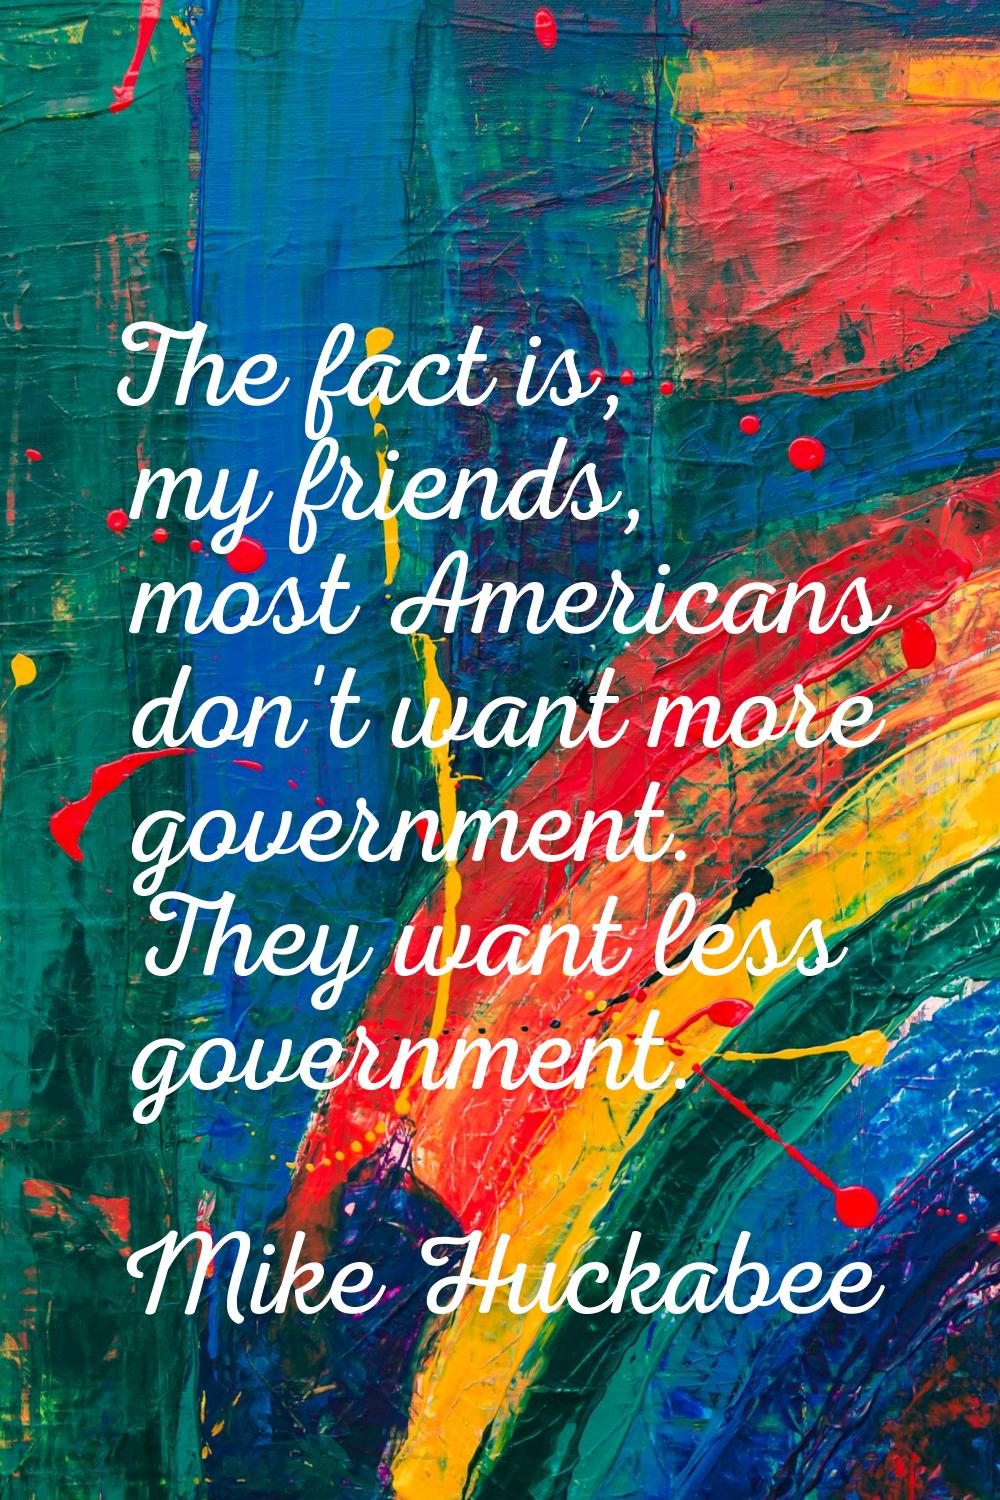 The fact is, my friends, most Americans don't want more government. They want less government.